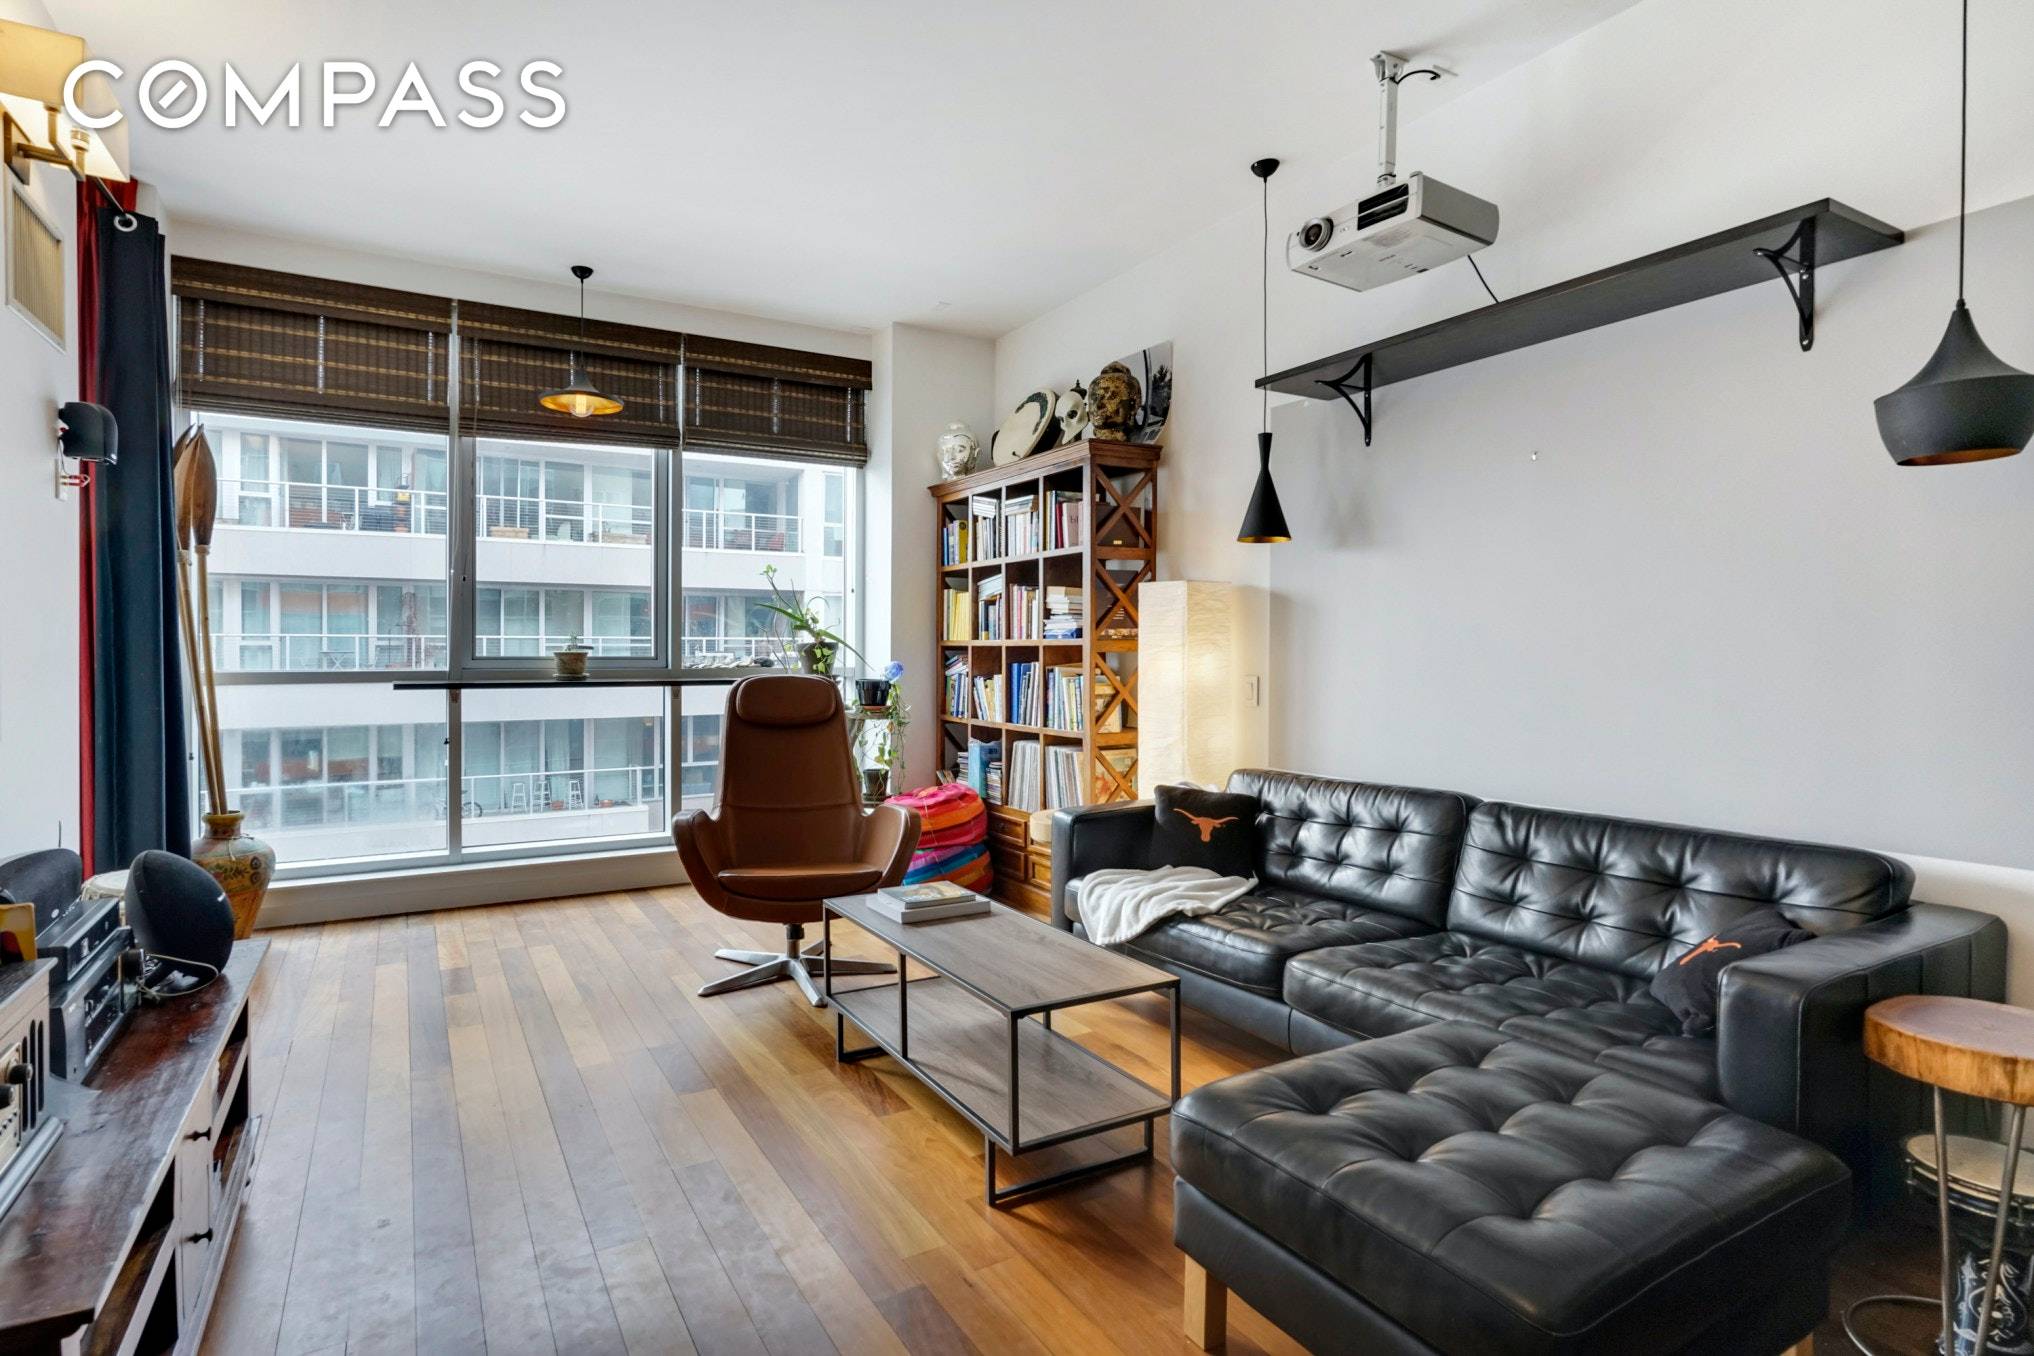 Furnished or Un furnished options available for a beautiful 1 BED 1 BATH modern Williamsburg condo located just 1 block from McCarren Park and a few blocks from the L ...